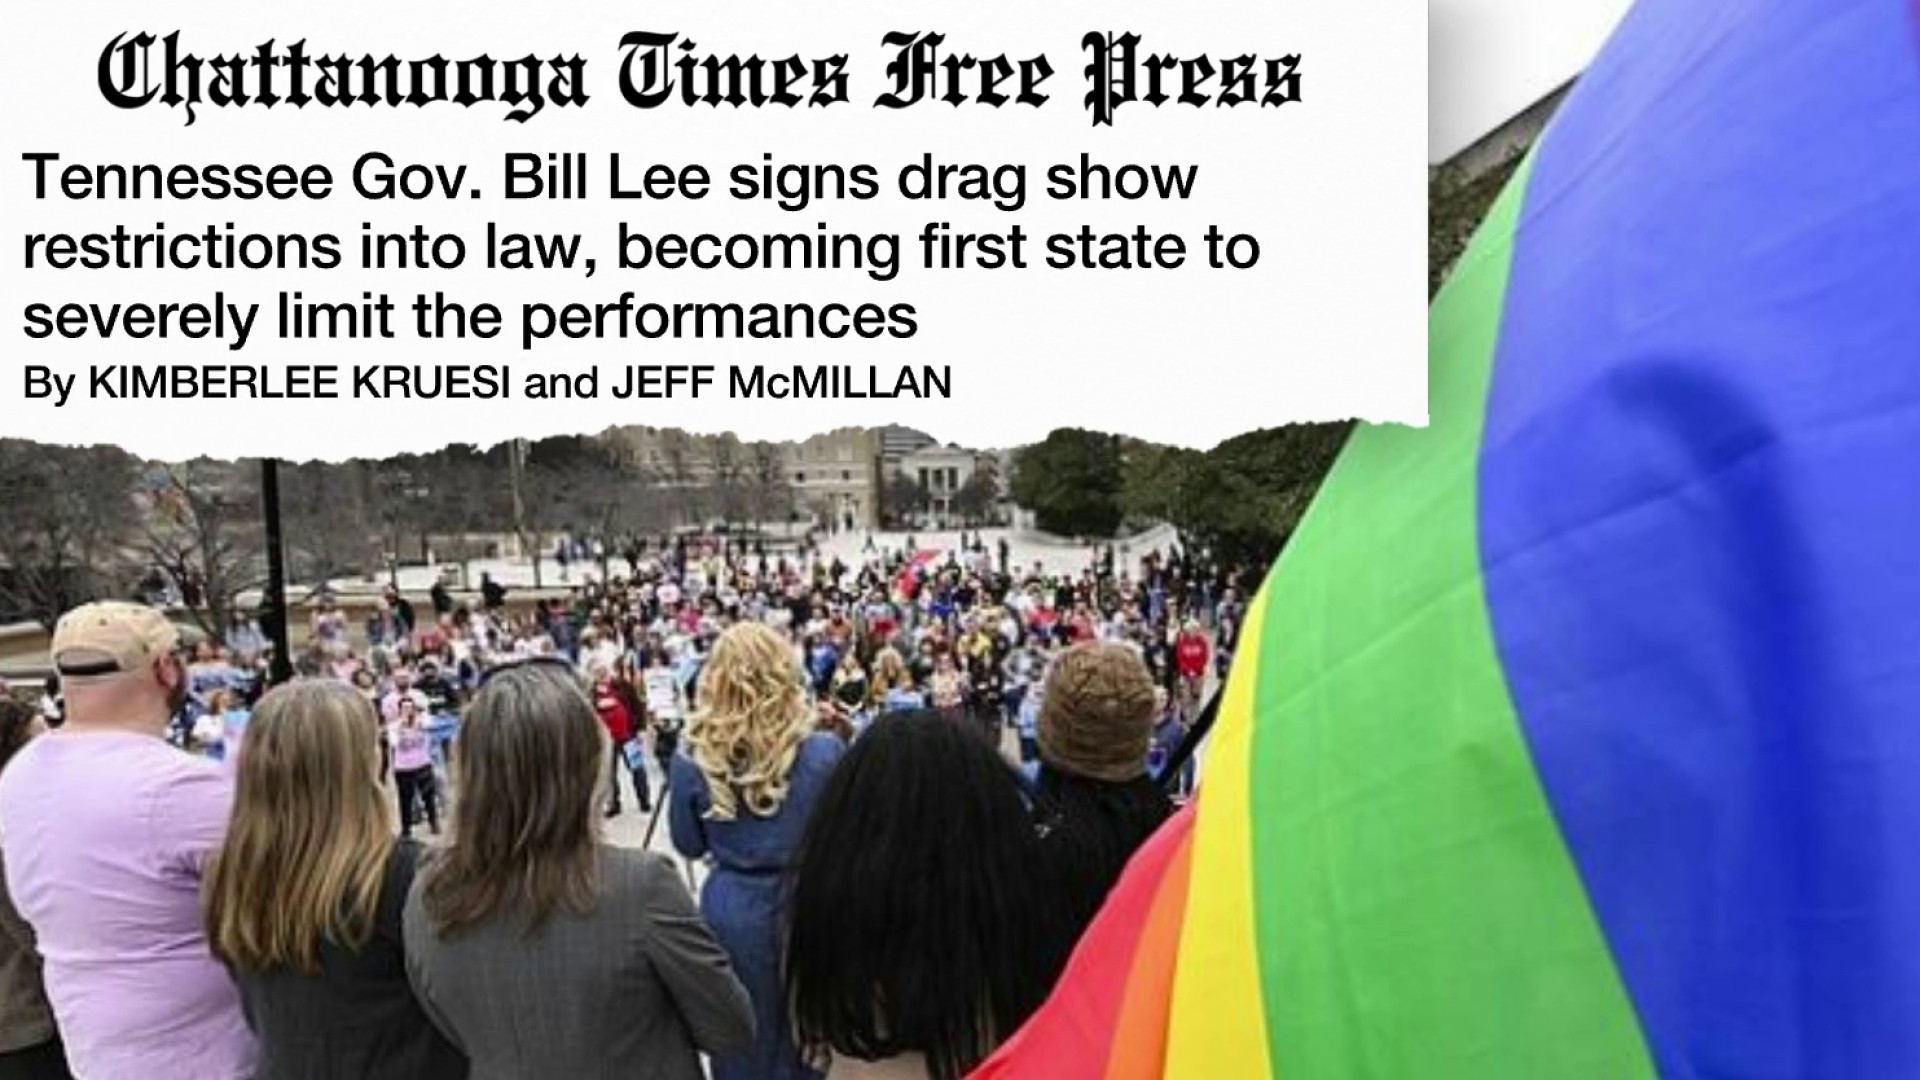 Anti-drag GOPers caught in drag, like Tennessee's Bill Lee, have lesson to  learn